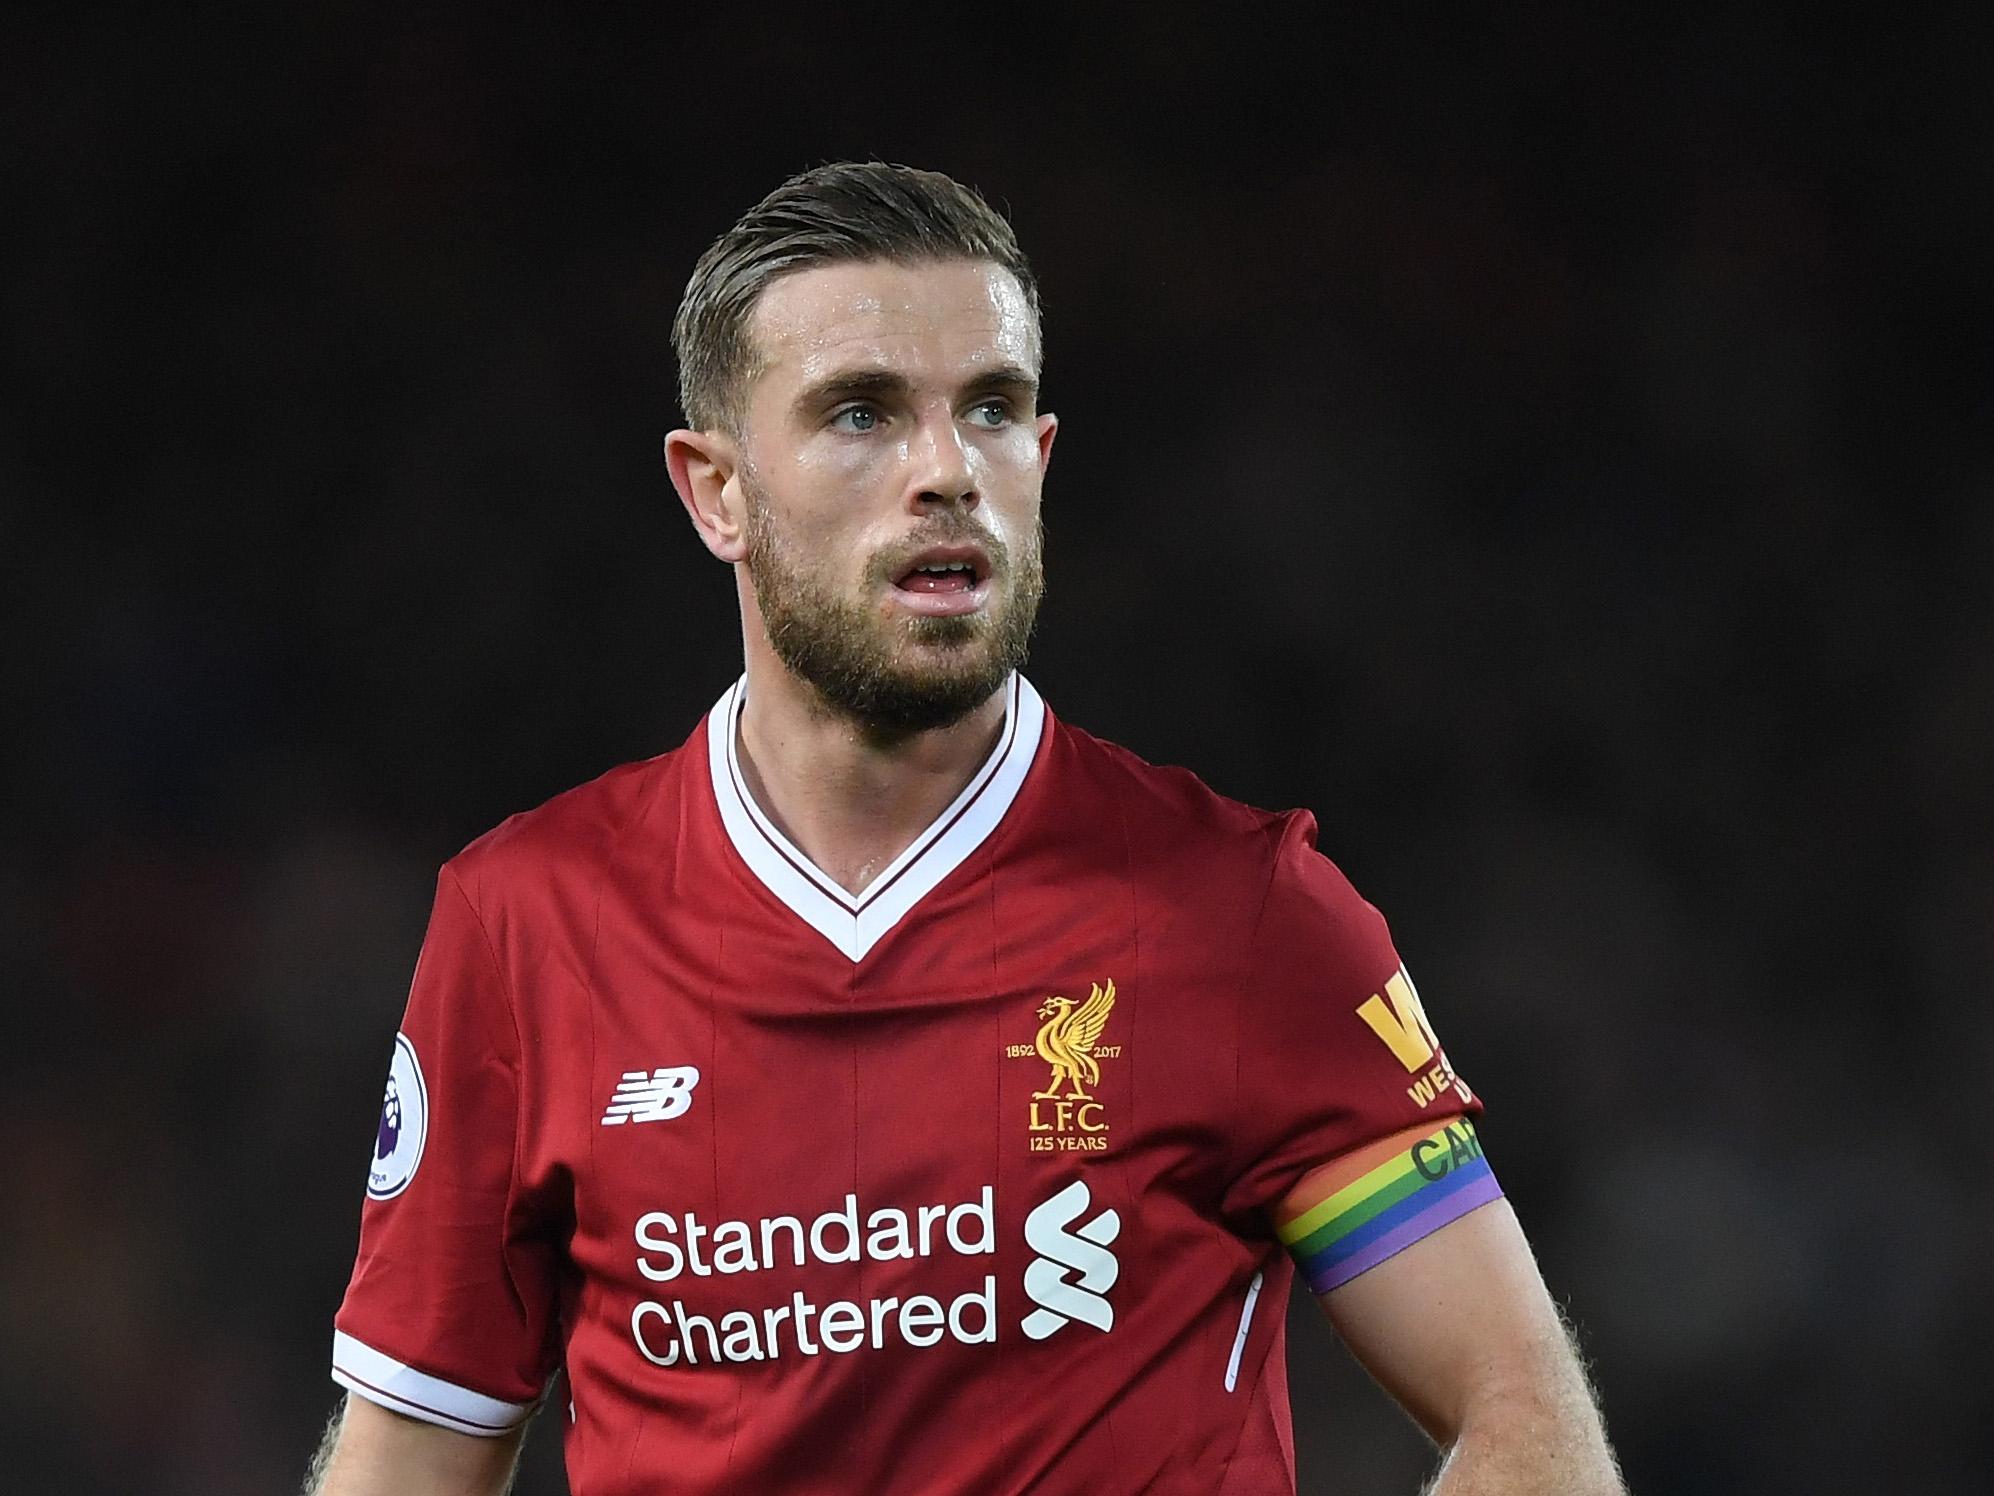 Henderson took over from Gerrard as captain